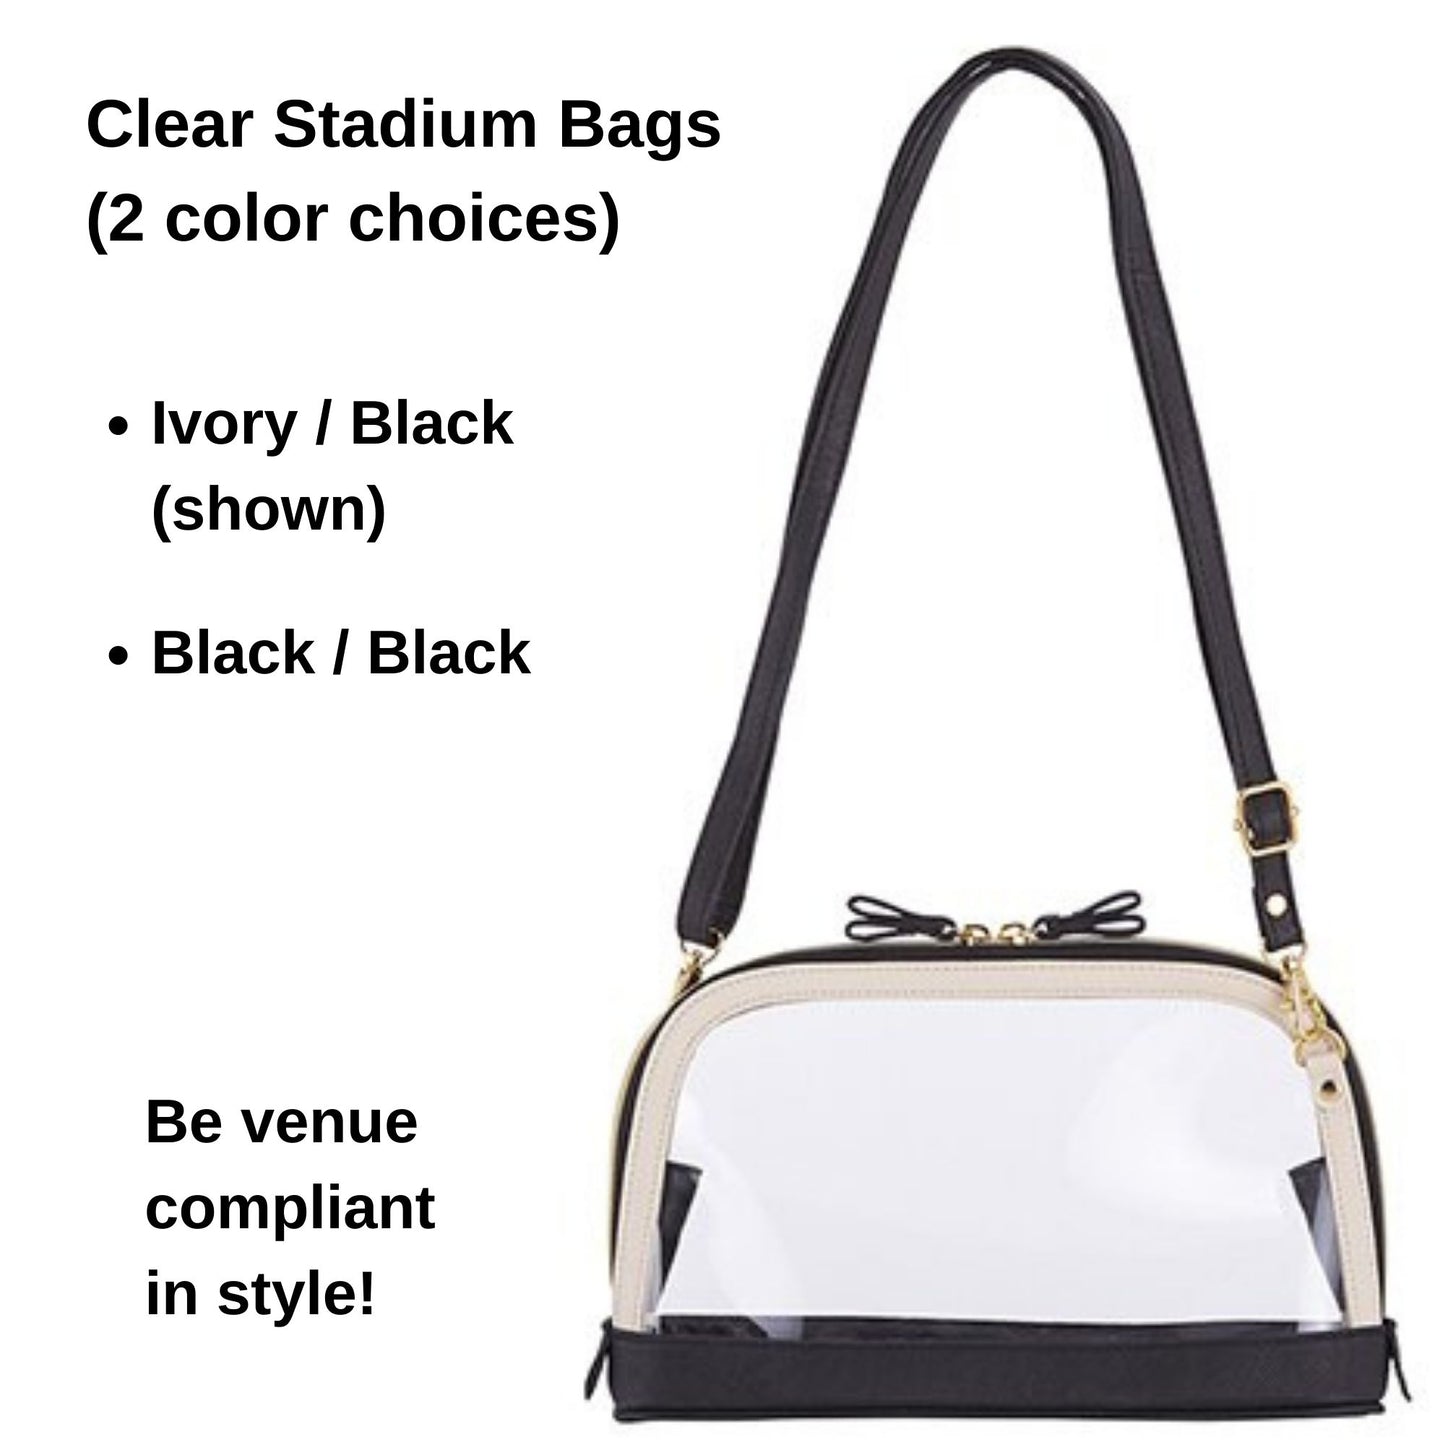 Clear Stadium Bag - Clear Purse with Strap and Bow - Clear Compliant Bag (2 options) | Be venue compliant in style with a clear purse | oak7west.com